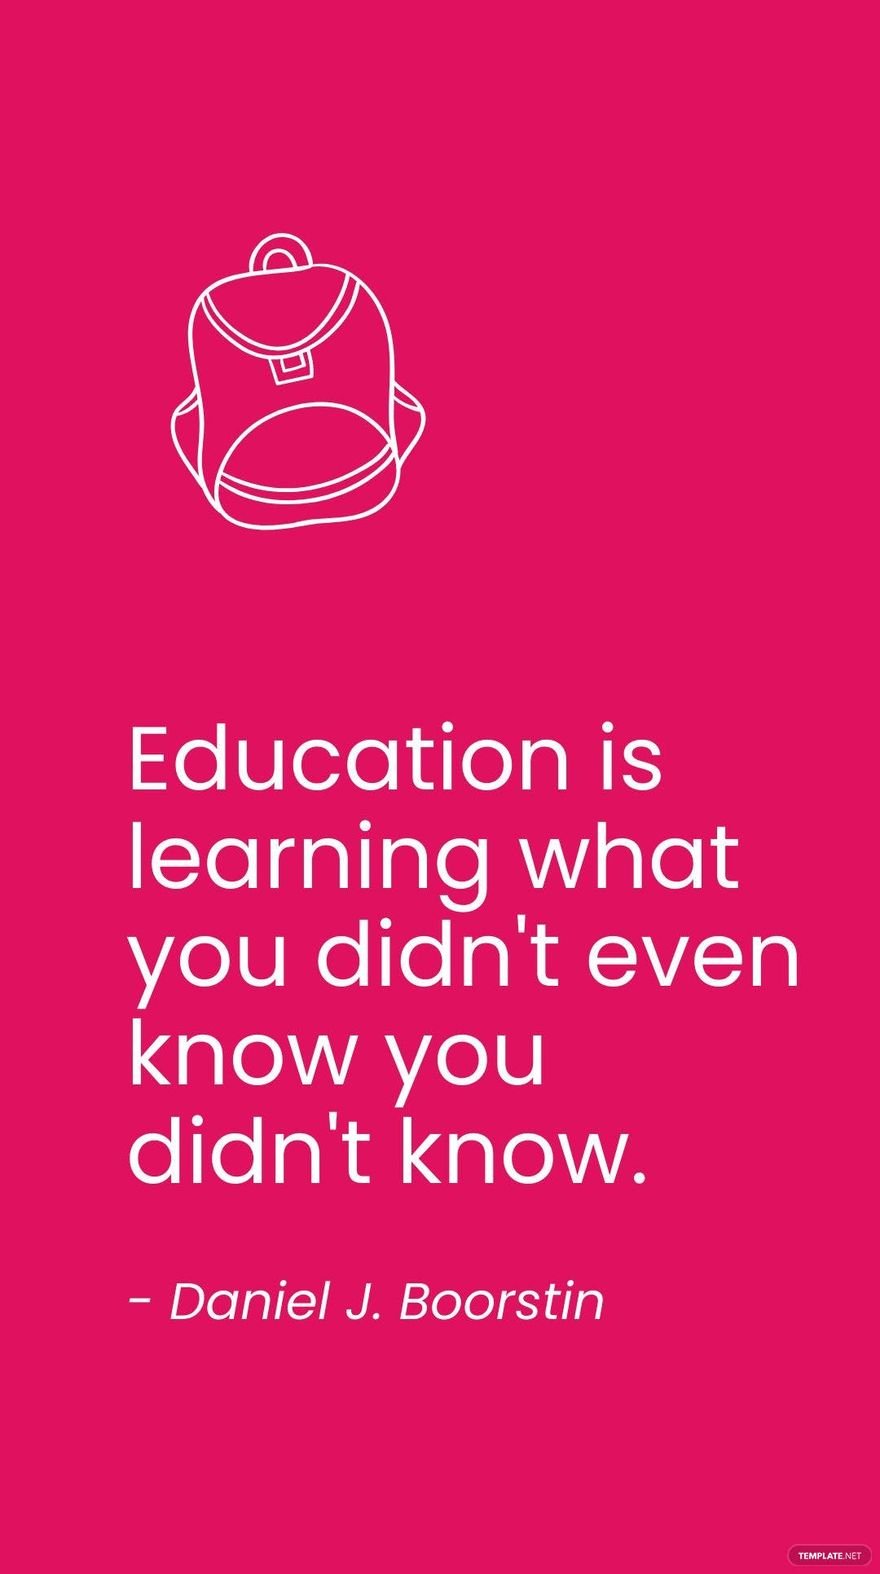 Daniel J. Boorstin - Education is learning what you didn't even know you didn't know. in JPG